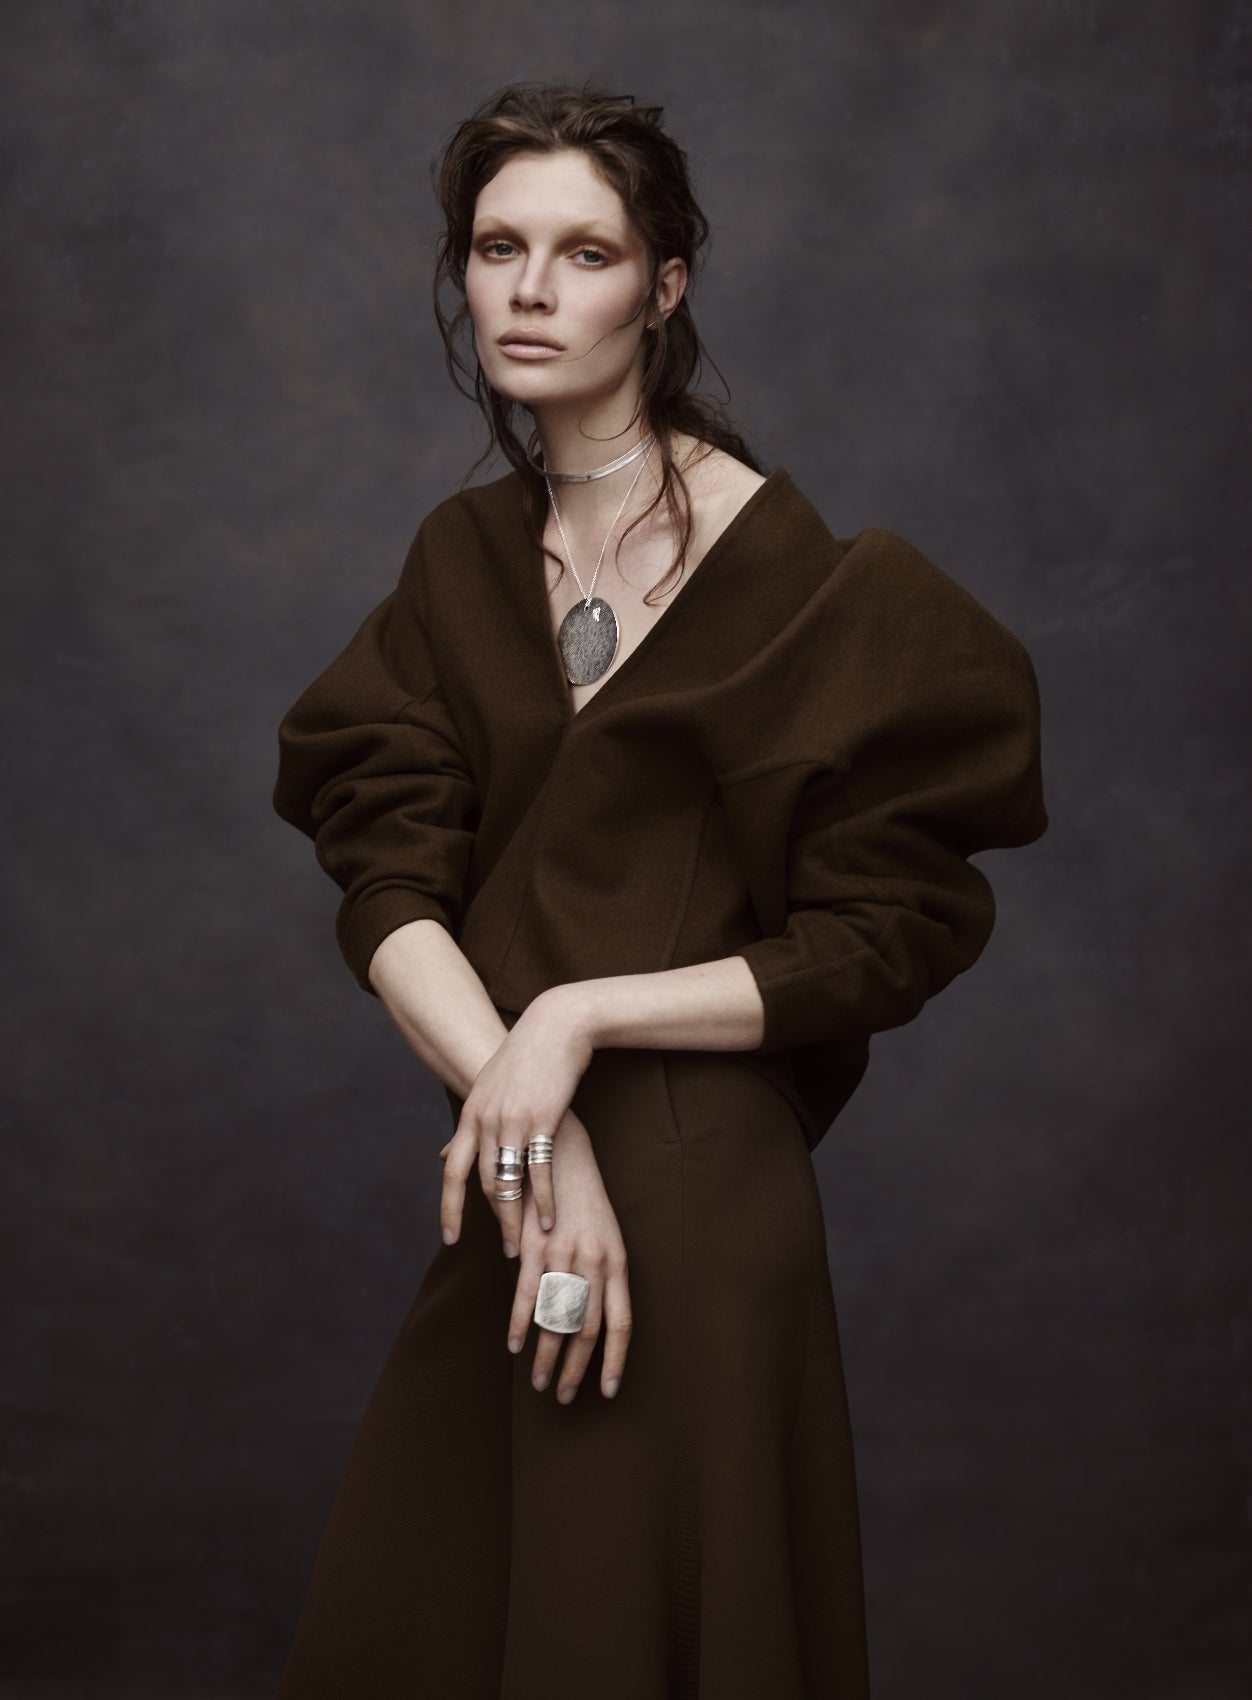 Photograph by Damian Foxe. A Lady wearing Wright & Teague Jewellery.